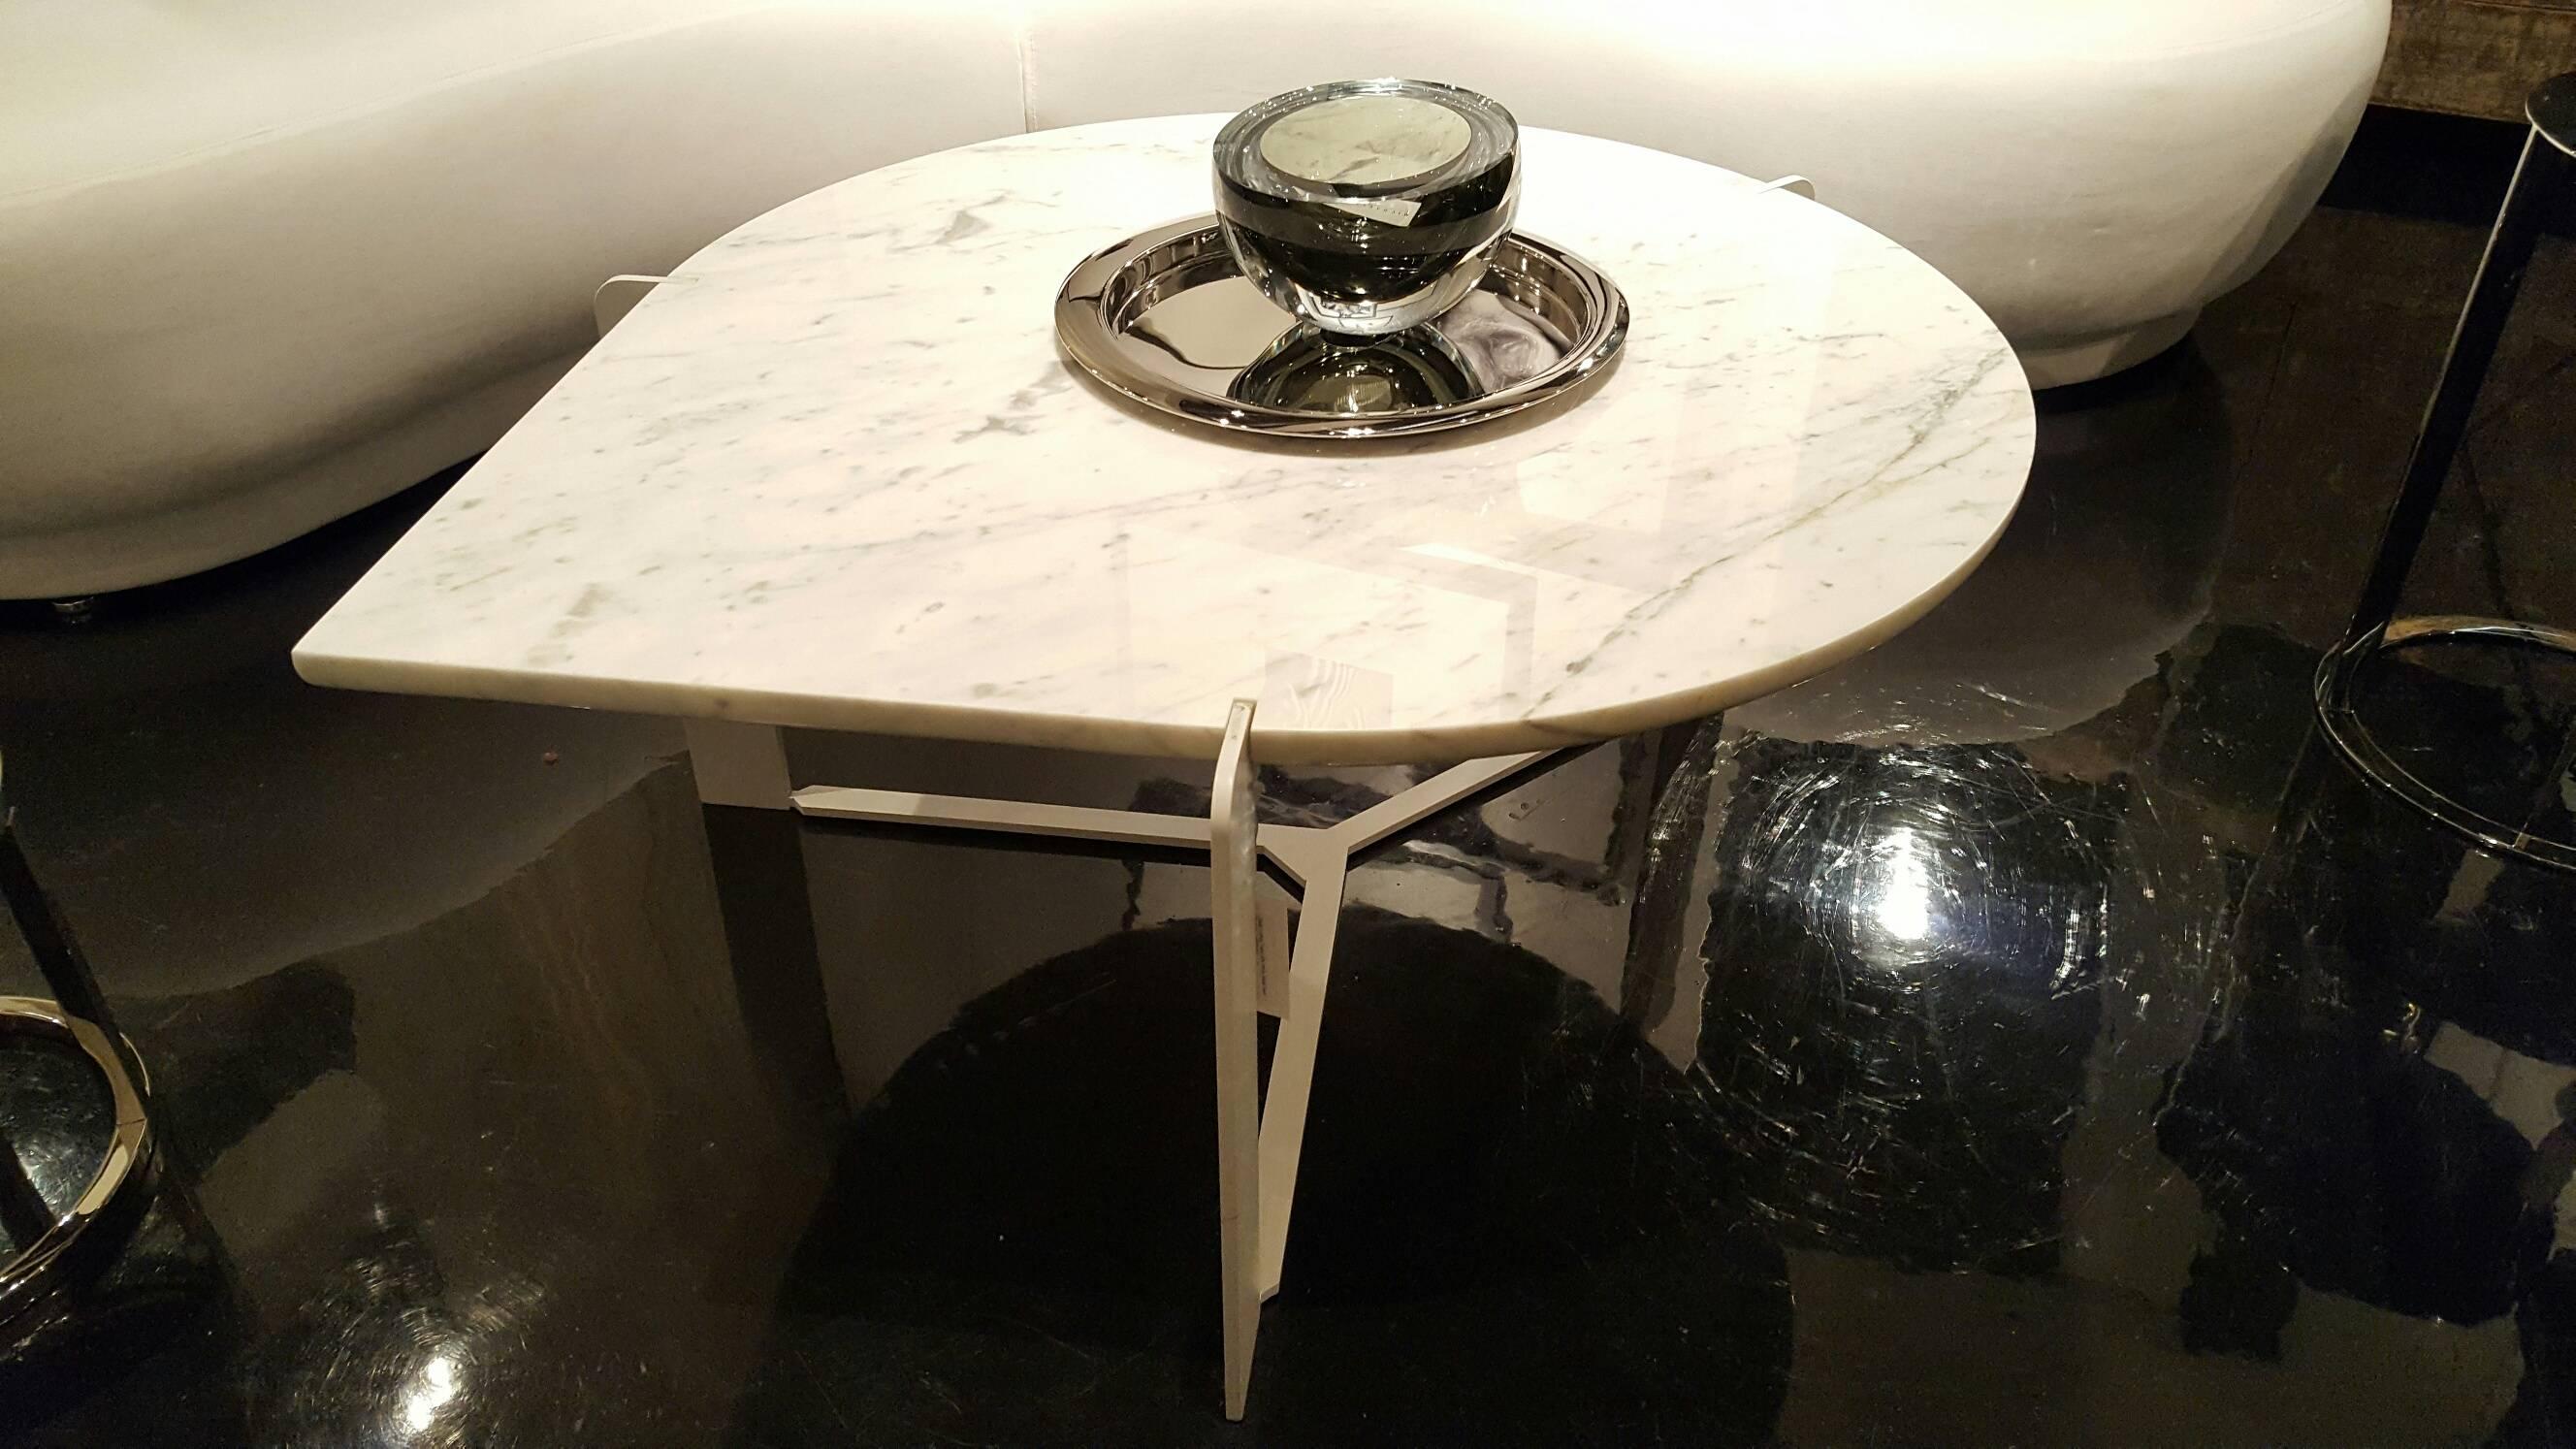 Beautiful bead coffee table with white metal base
and Carrara marble top
Measures: 36" diameter x 18" height.